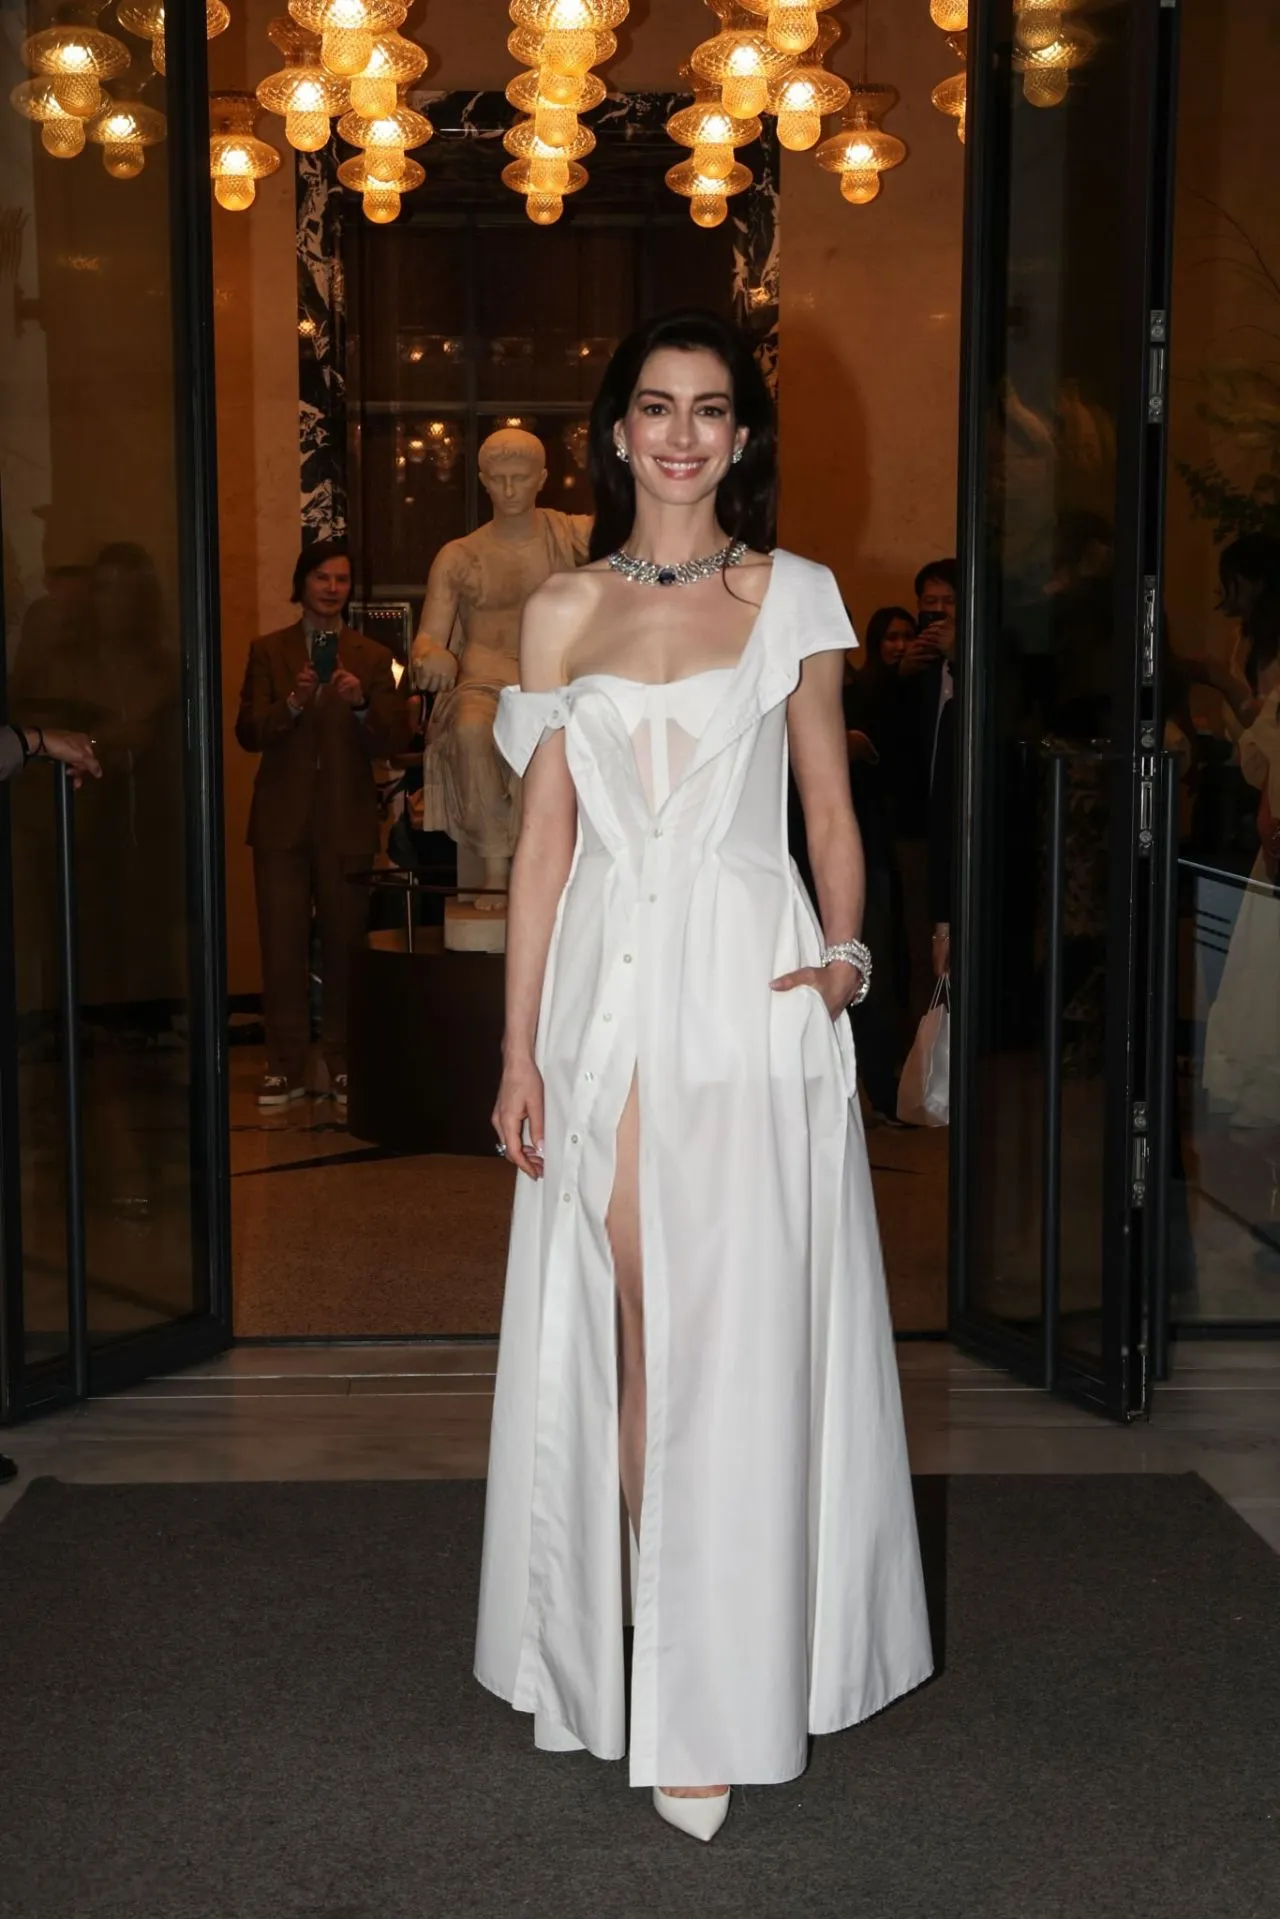 ANNE HATHAWAY IN WHITE DRESS AT THE BULGARI HOTEL IN ROME6